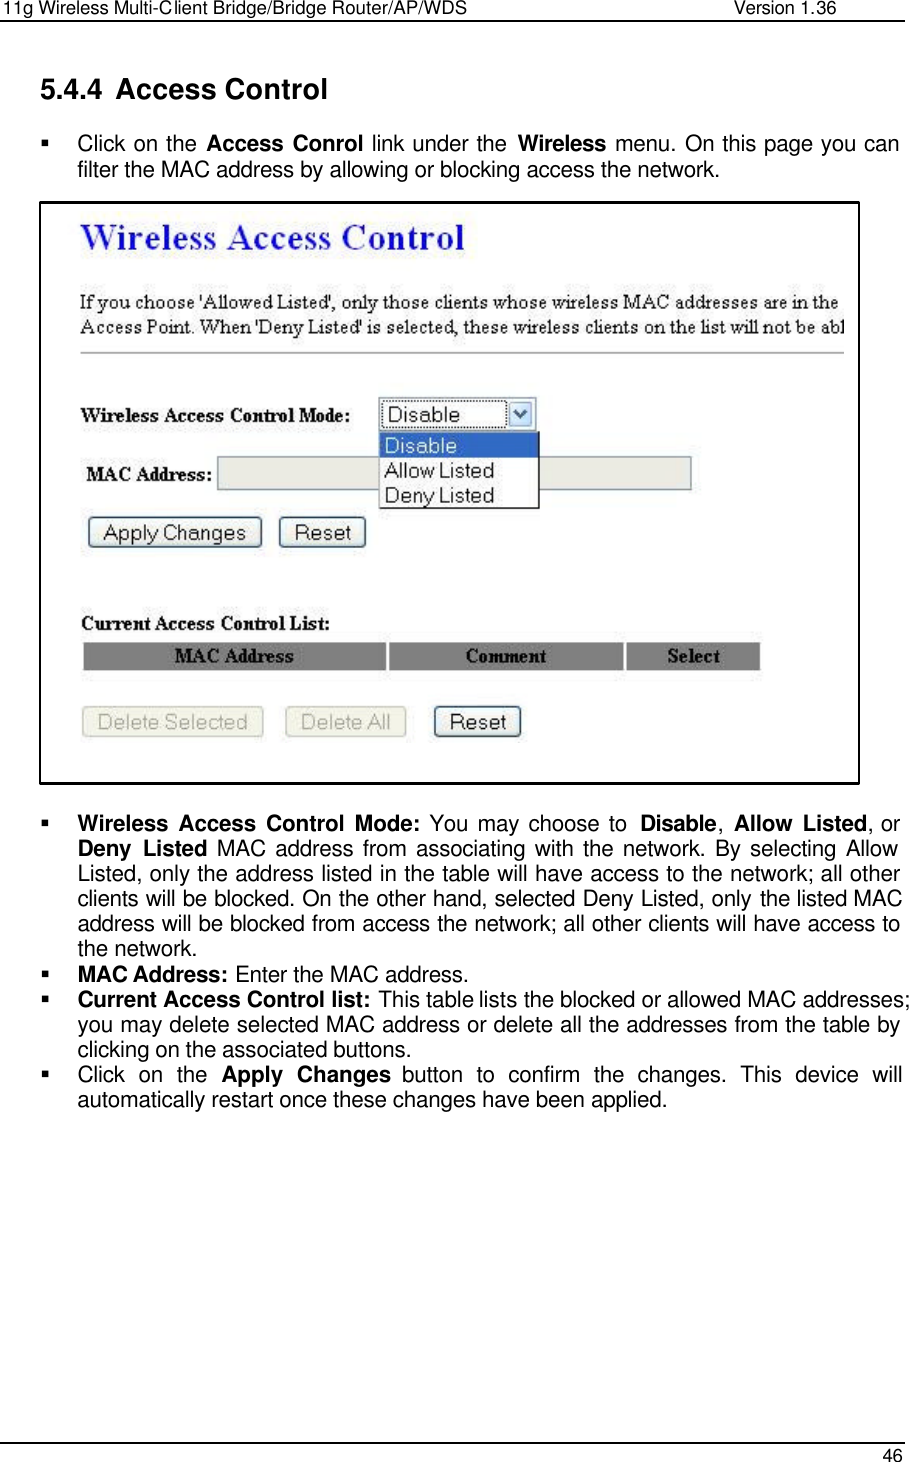 11g Wireless Multi-Client Bridge/Bridge Router/AP/WDS                                                   Version 1.36    46  5.4.4 Access Control  § Click on the Access Conrol link under the Wireless menu. On this page you can filter the MAC address by allowing or blocking access the network.                           § Wireless Access Control Mode: You may choose to  Disable,  Allow Listed, or Deny Listed MAC address from associating with the network. By selecting Allow Listed, only the address listed in the table will have access to the network; all other clients will be blocked. On the other hand, selected Deny Listed, only the listed MAC address will be blocked from access the network; all other clients will have access to the network.  § MAC Address: Enter the MAC address.  § Current Access Control list: This table lists the blocked or allowed MAC addresses; you may delete selected MAC address or delete all the addresses from the table by clicking on the associated buttons.  § Click on the Apply Changes button to confirm the changes. This device will automatically restart once these changes have been applied.               